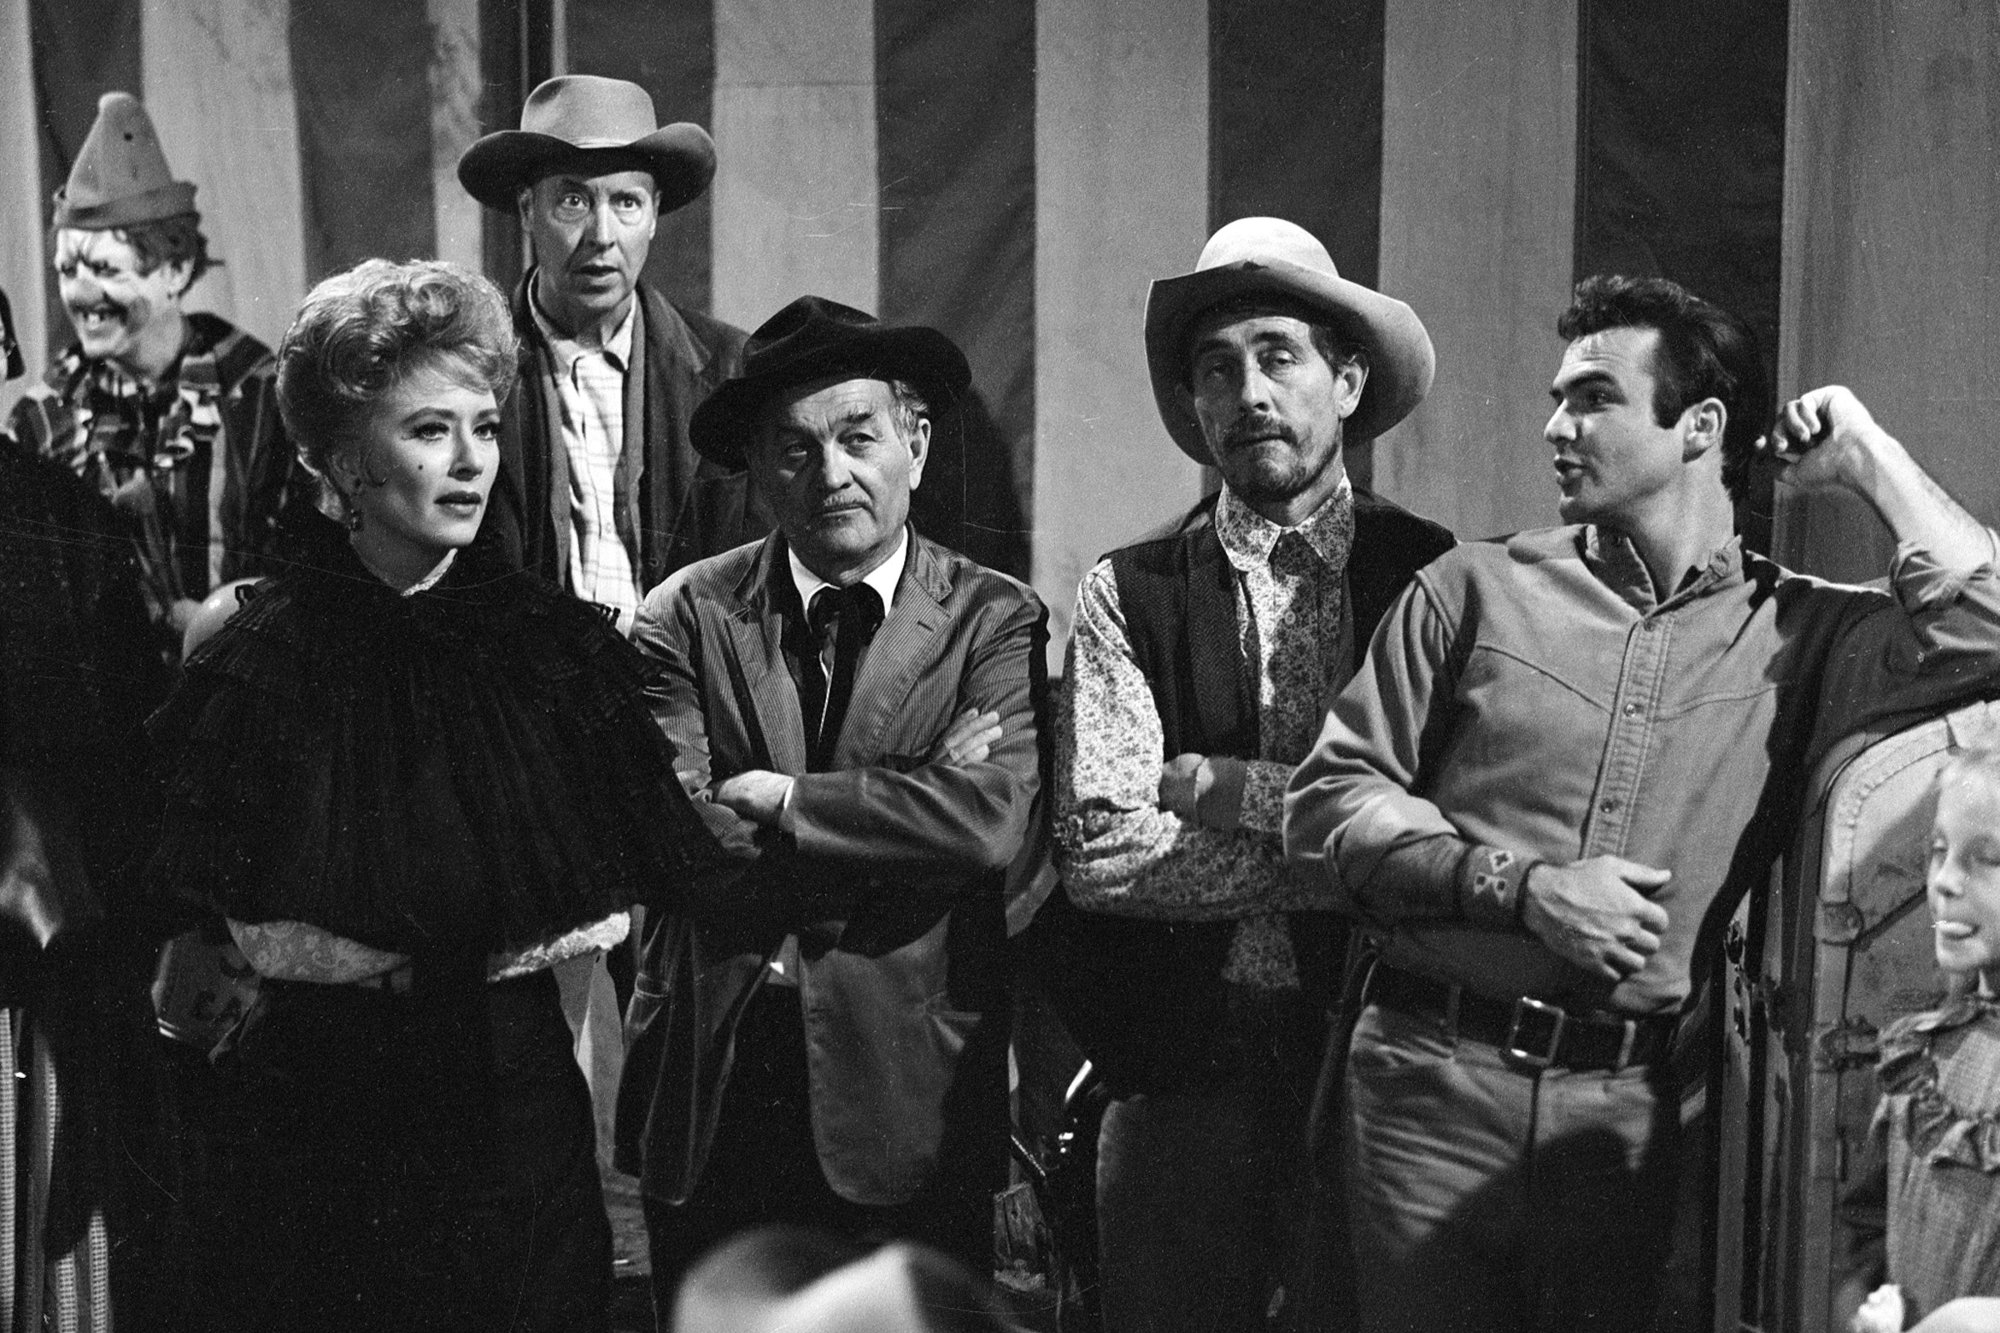 'Gunsmoke' episode 'Circus Trick' Amanda Blake as Kitty Russell, Milburn Stone as Doc Adams, Ken Curtis as Festus Haggen and Burt Reynolds as Quint standing at a circus looking upset with their arms crossed